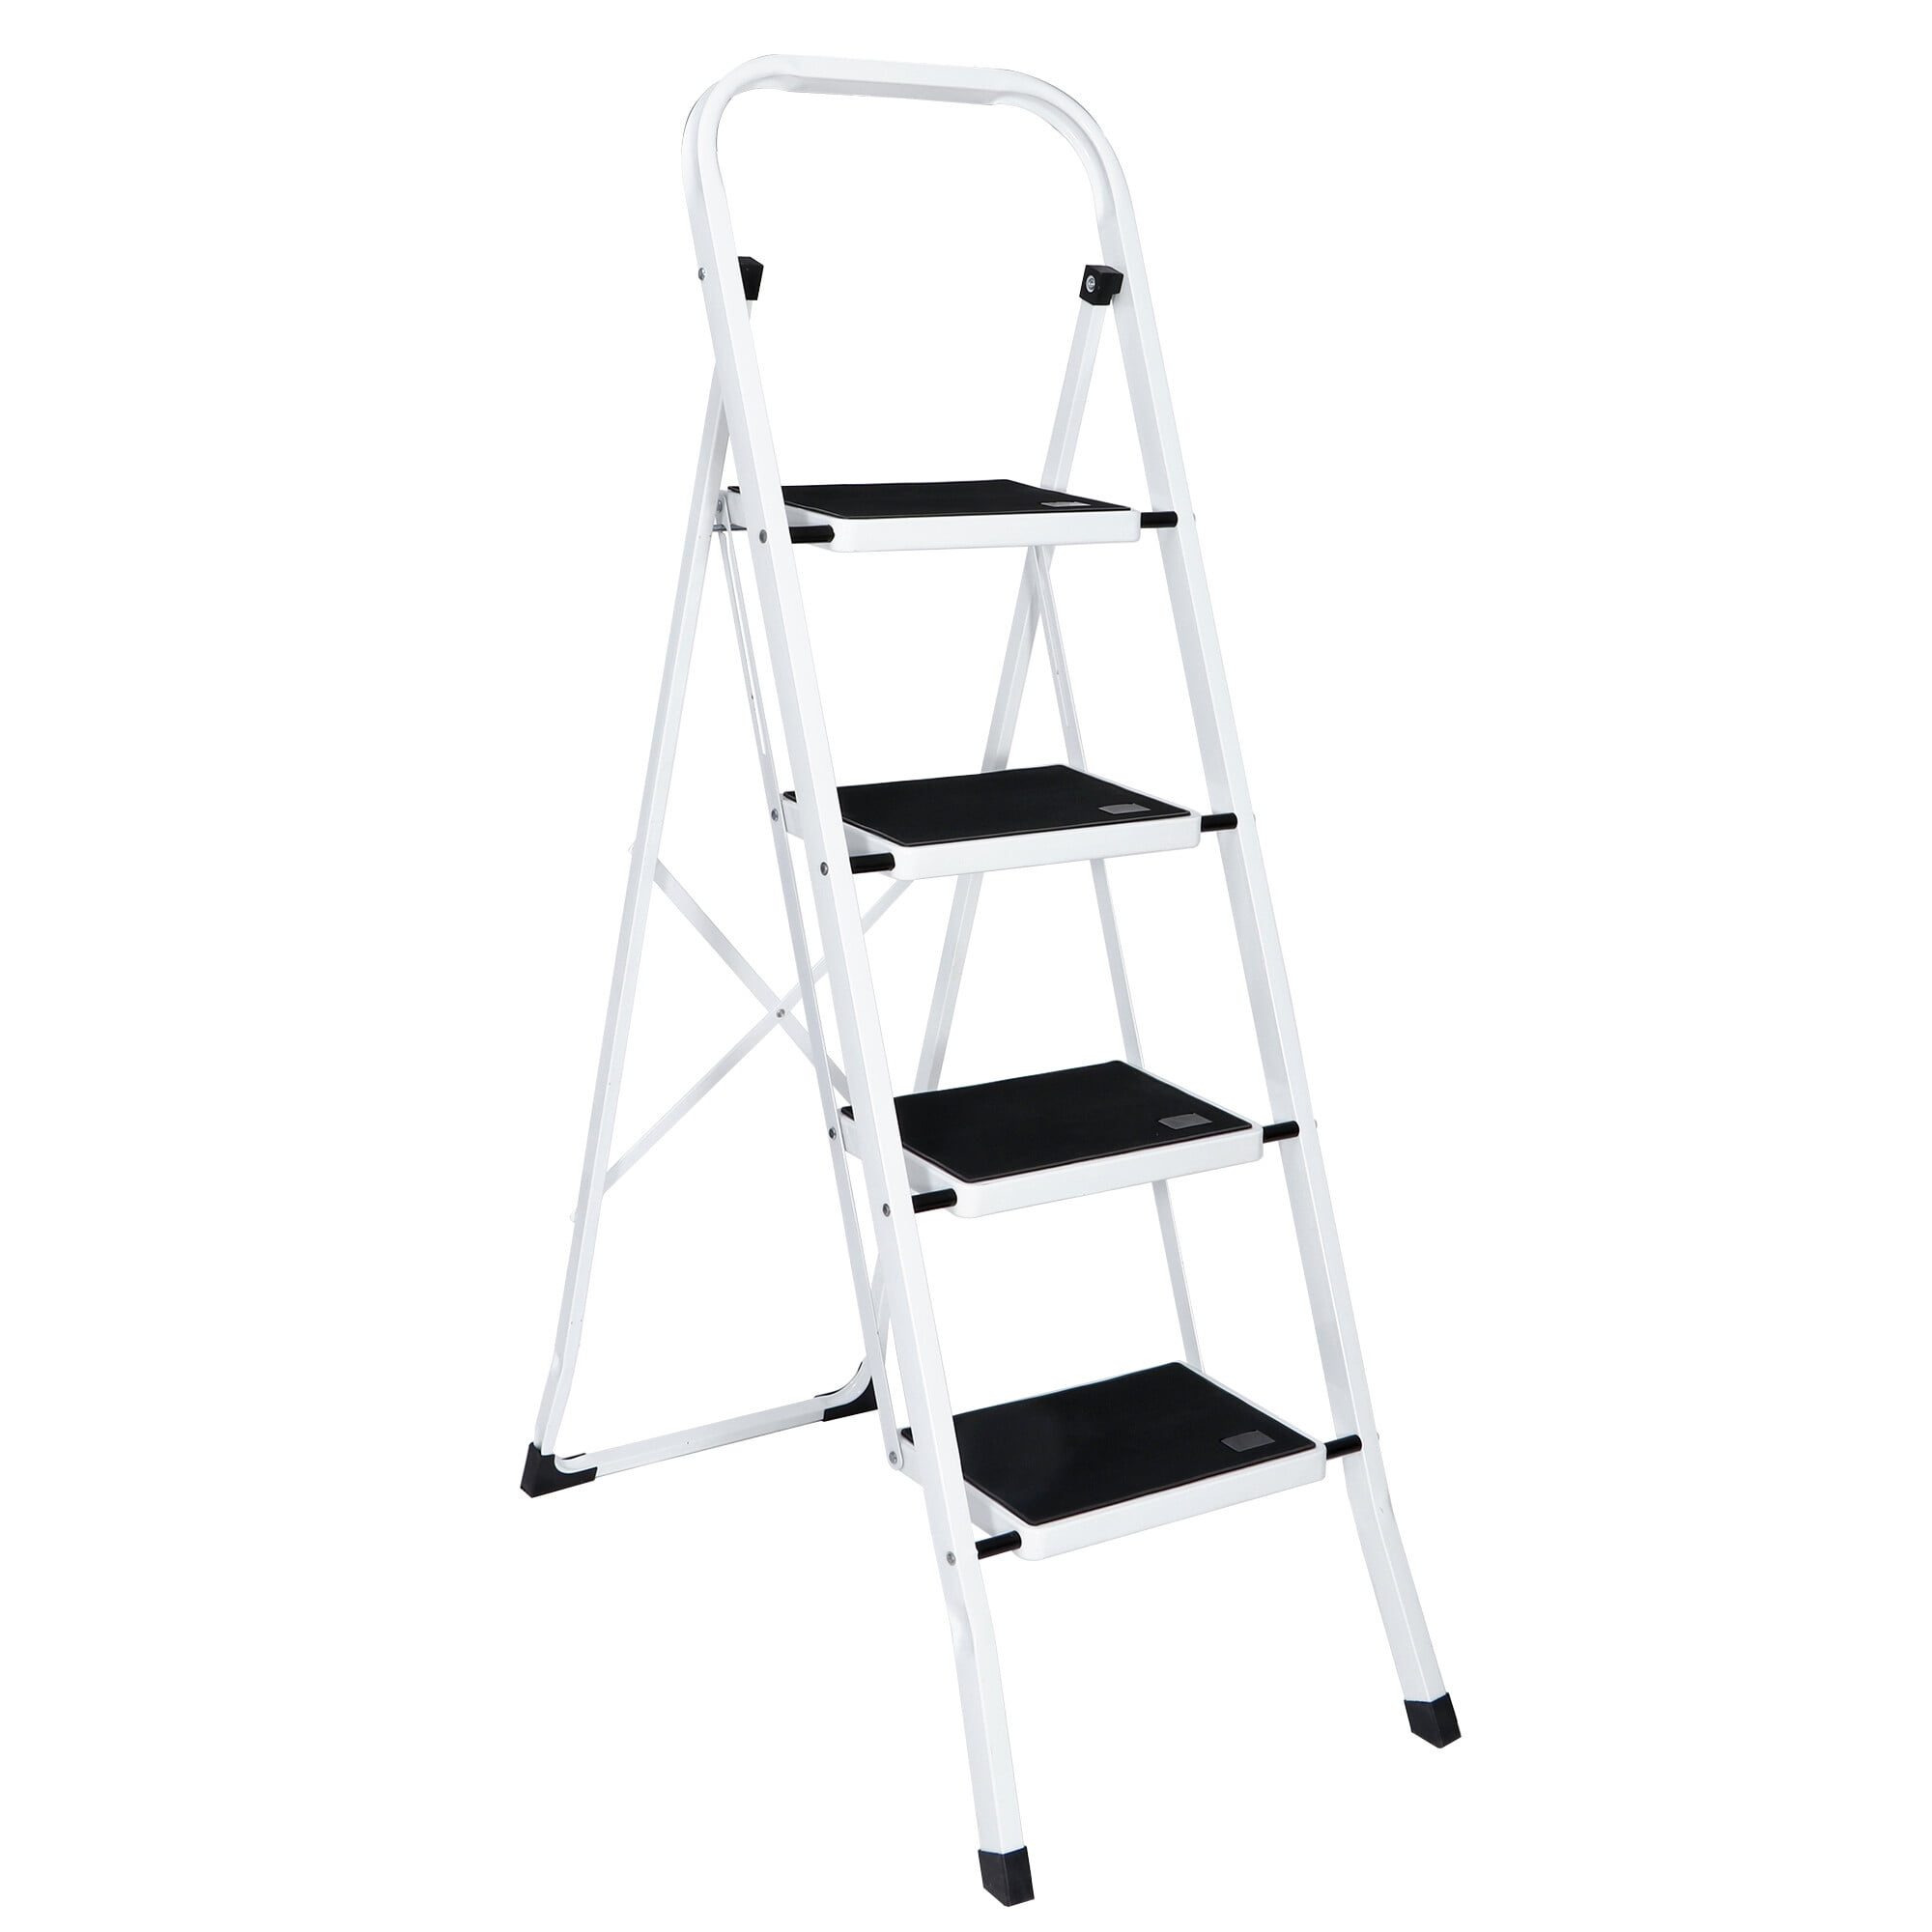 ZENY 4 Step Ladder Portable Folding Step Stool with Handgrip Anti-Slip, Wide Platform Steps, 330 lbs Capacity for Home and Kitchen